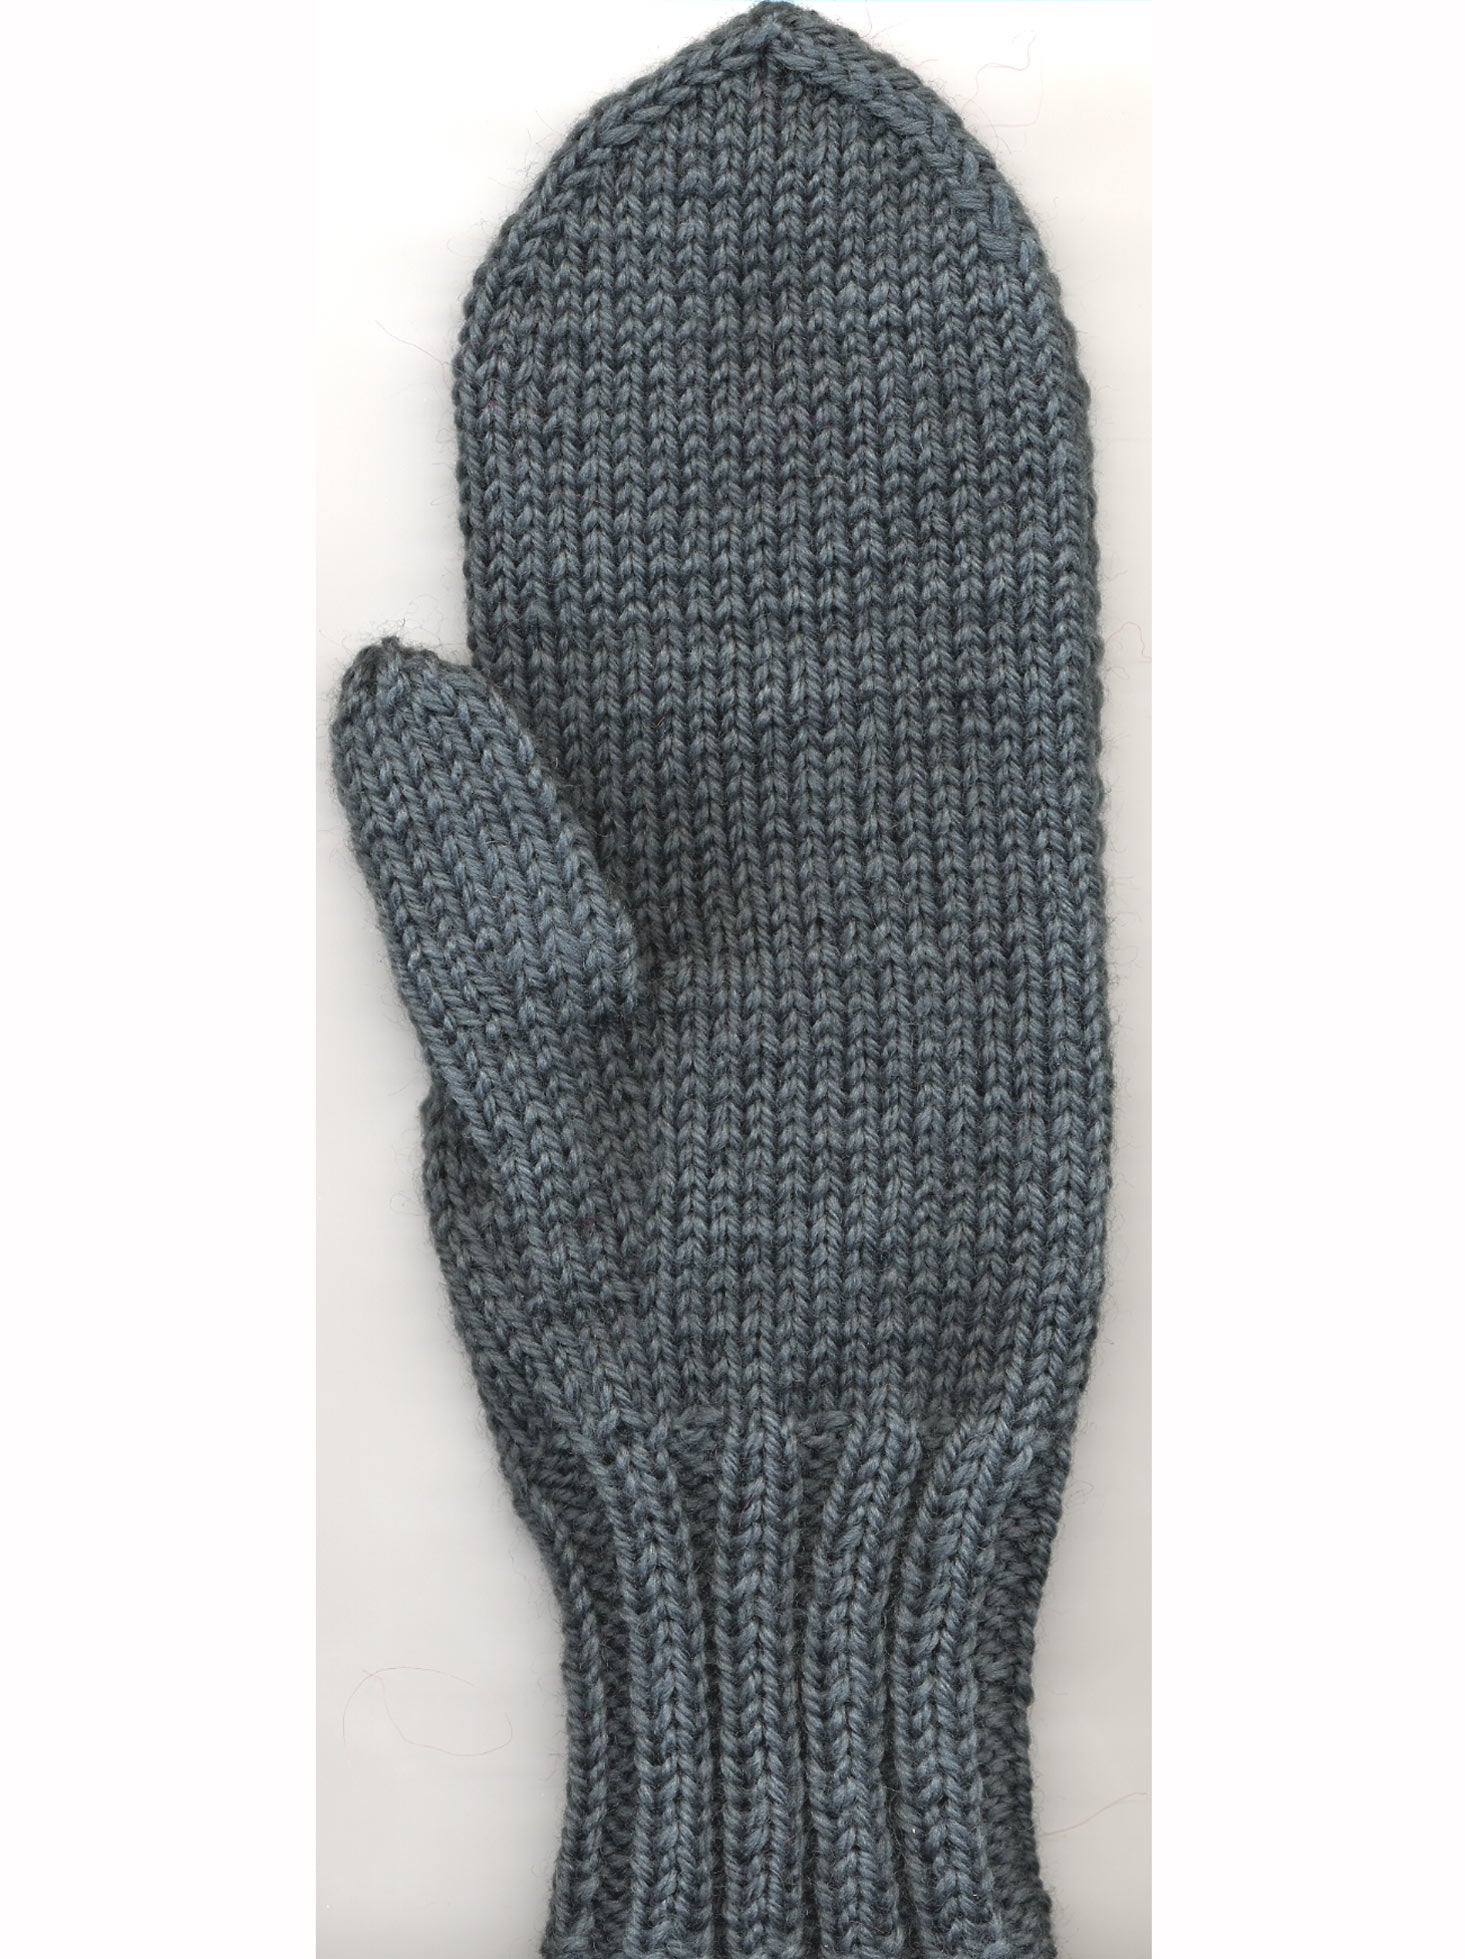 Two-Needle Mittens-Adult